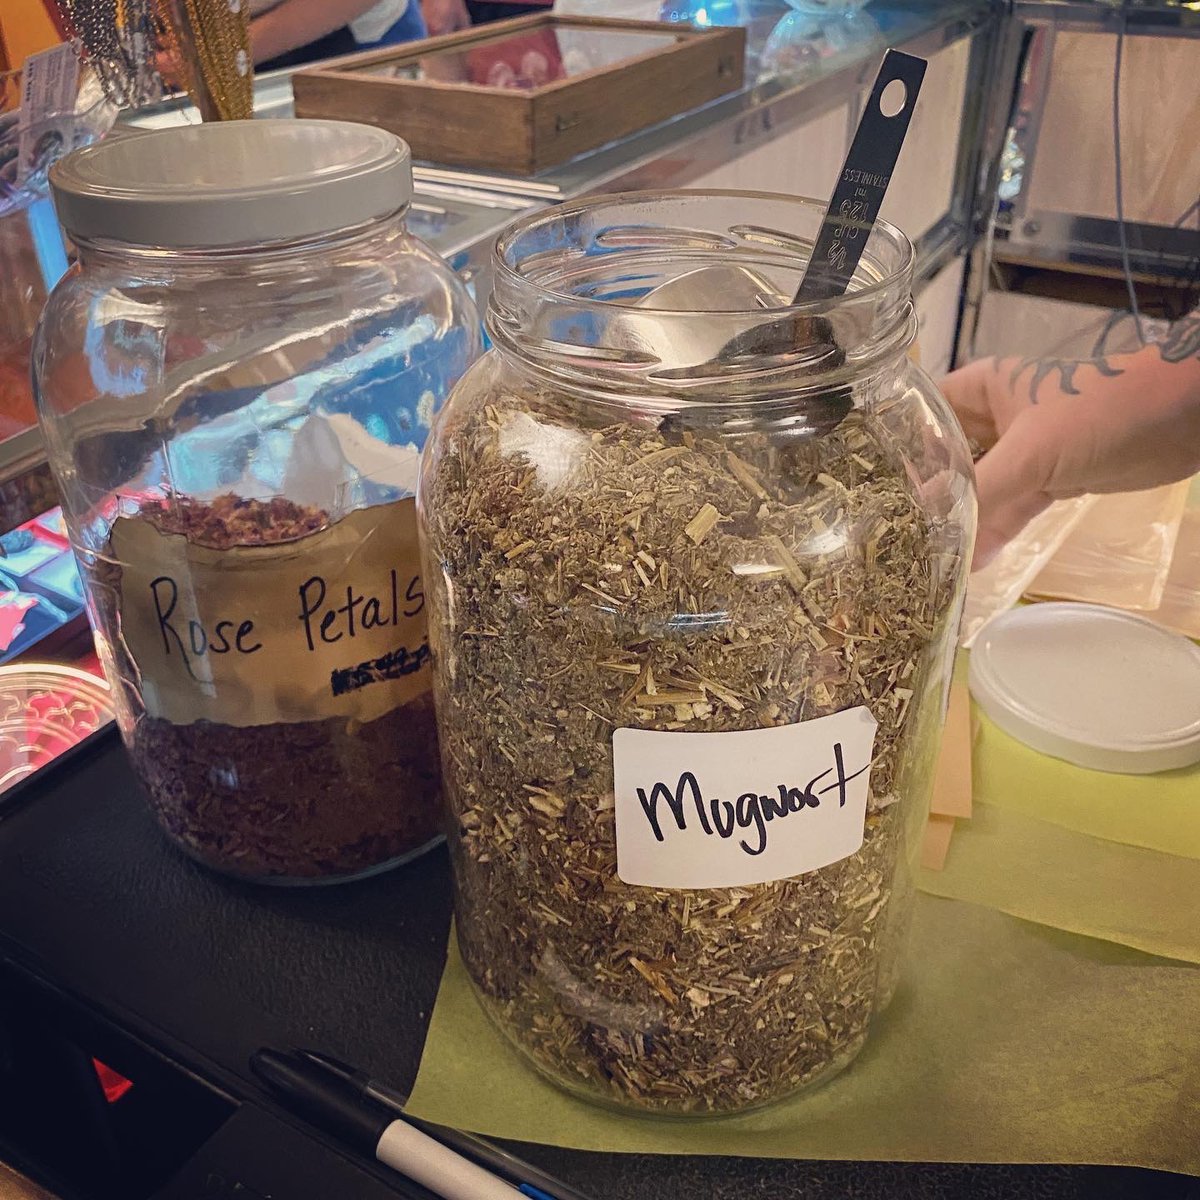 Team member Shelby has bagged up more Mugwort for y'all! 

We've got your Mugwort here: aromags.com/product/mugwor…

#Mugwort #OrganicHerbs #Herbs #MagicalHerbs #witch #hoodoo #Witchcraft #witchcraftsupplies #hoodoosupplies #lunar #herbs #organic #Psychic #clairvoyant